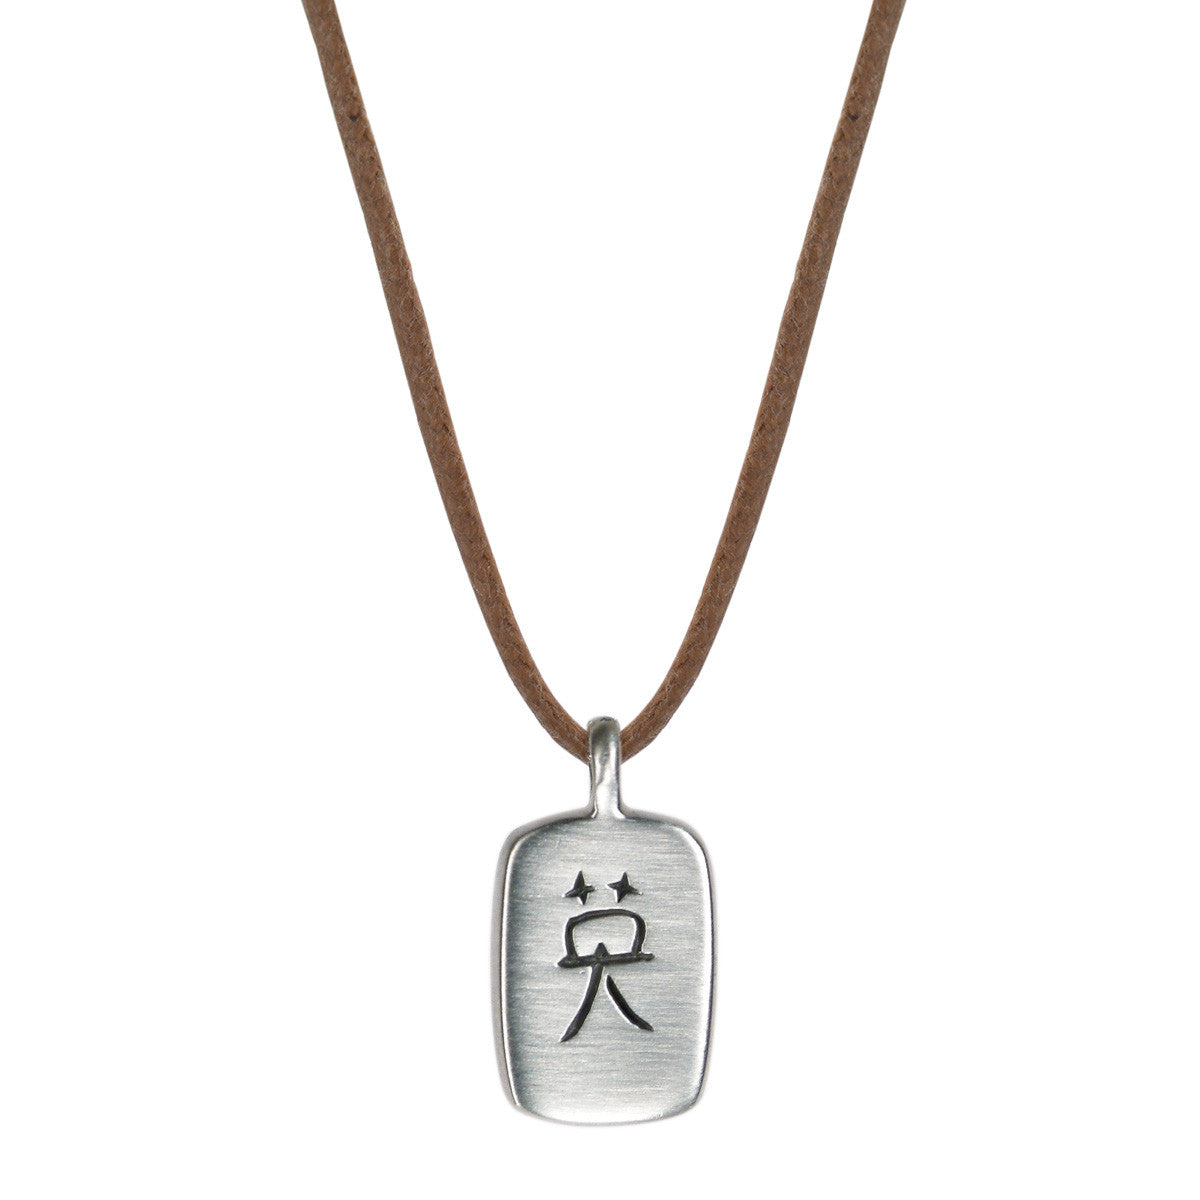 Men's Sterling Silver Courage Pendant on Natural Cord